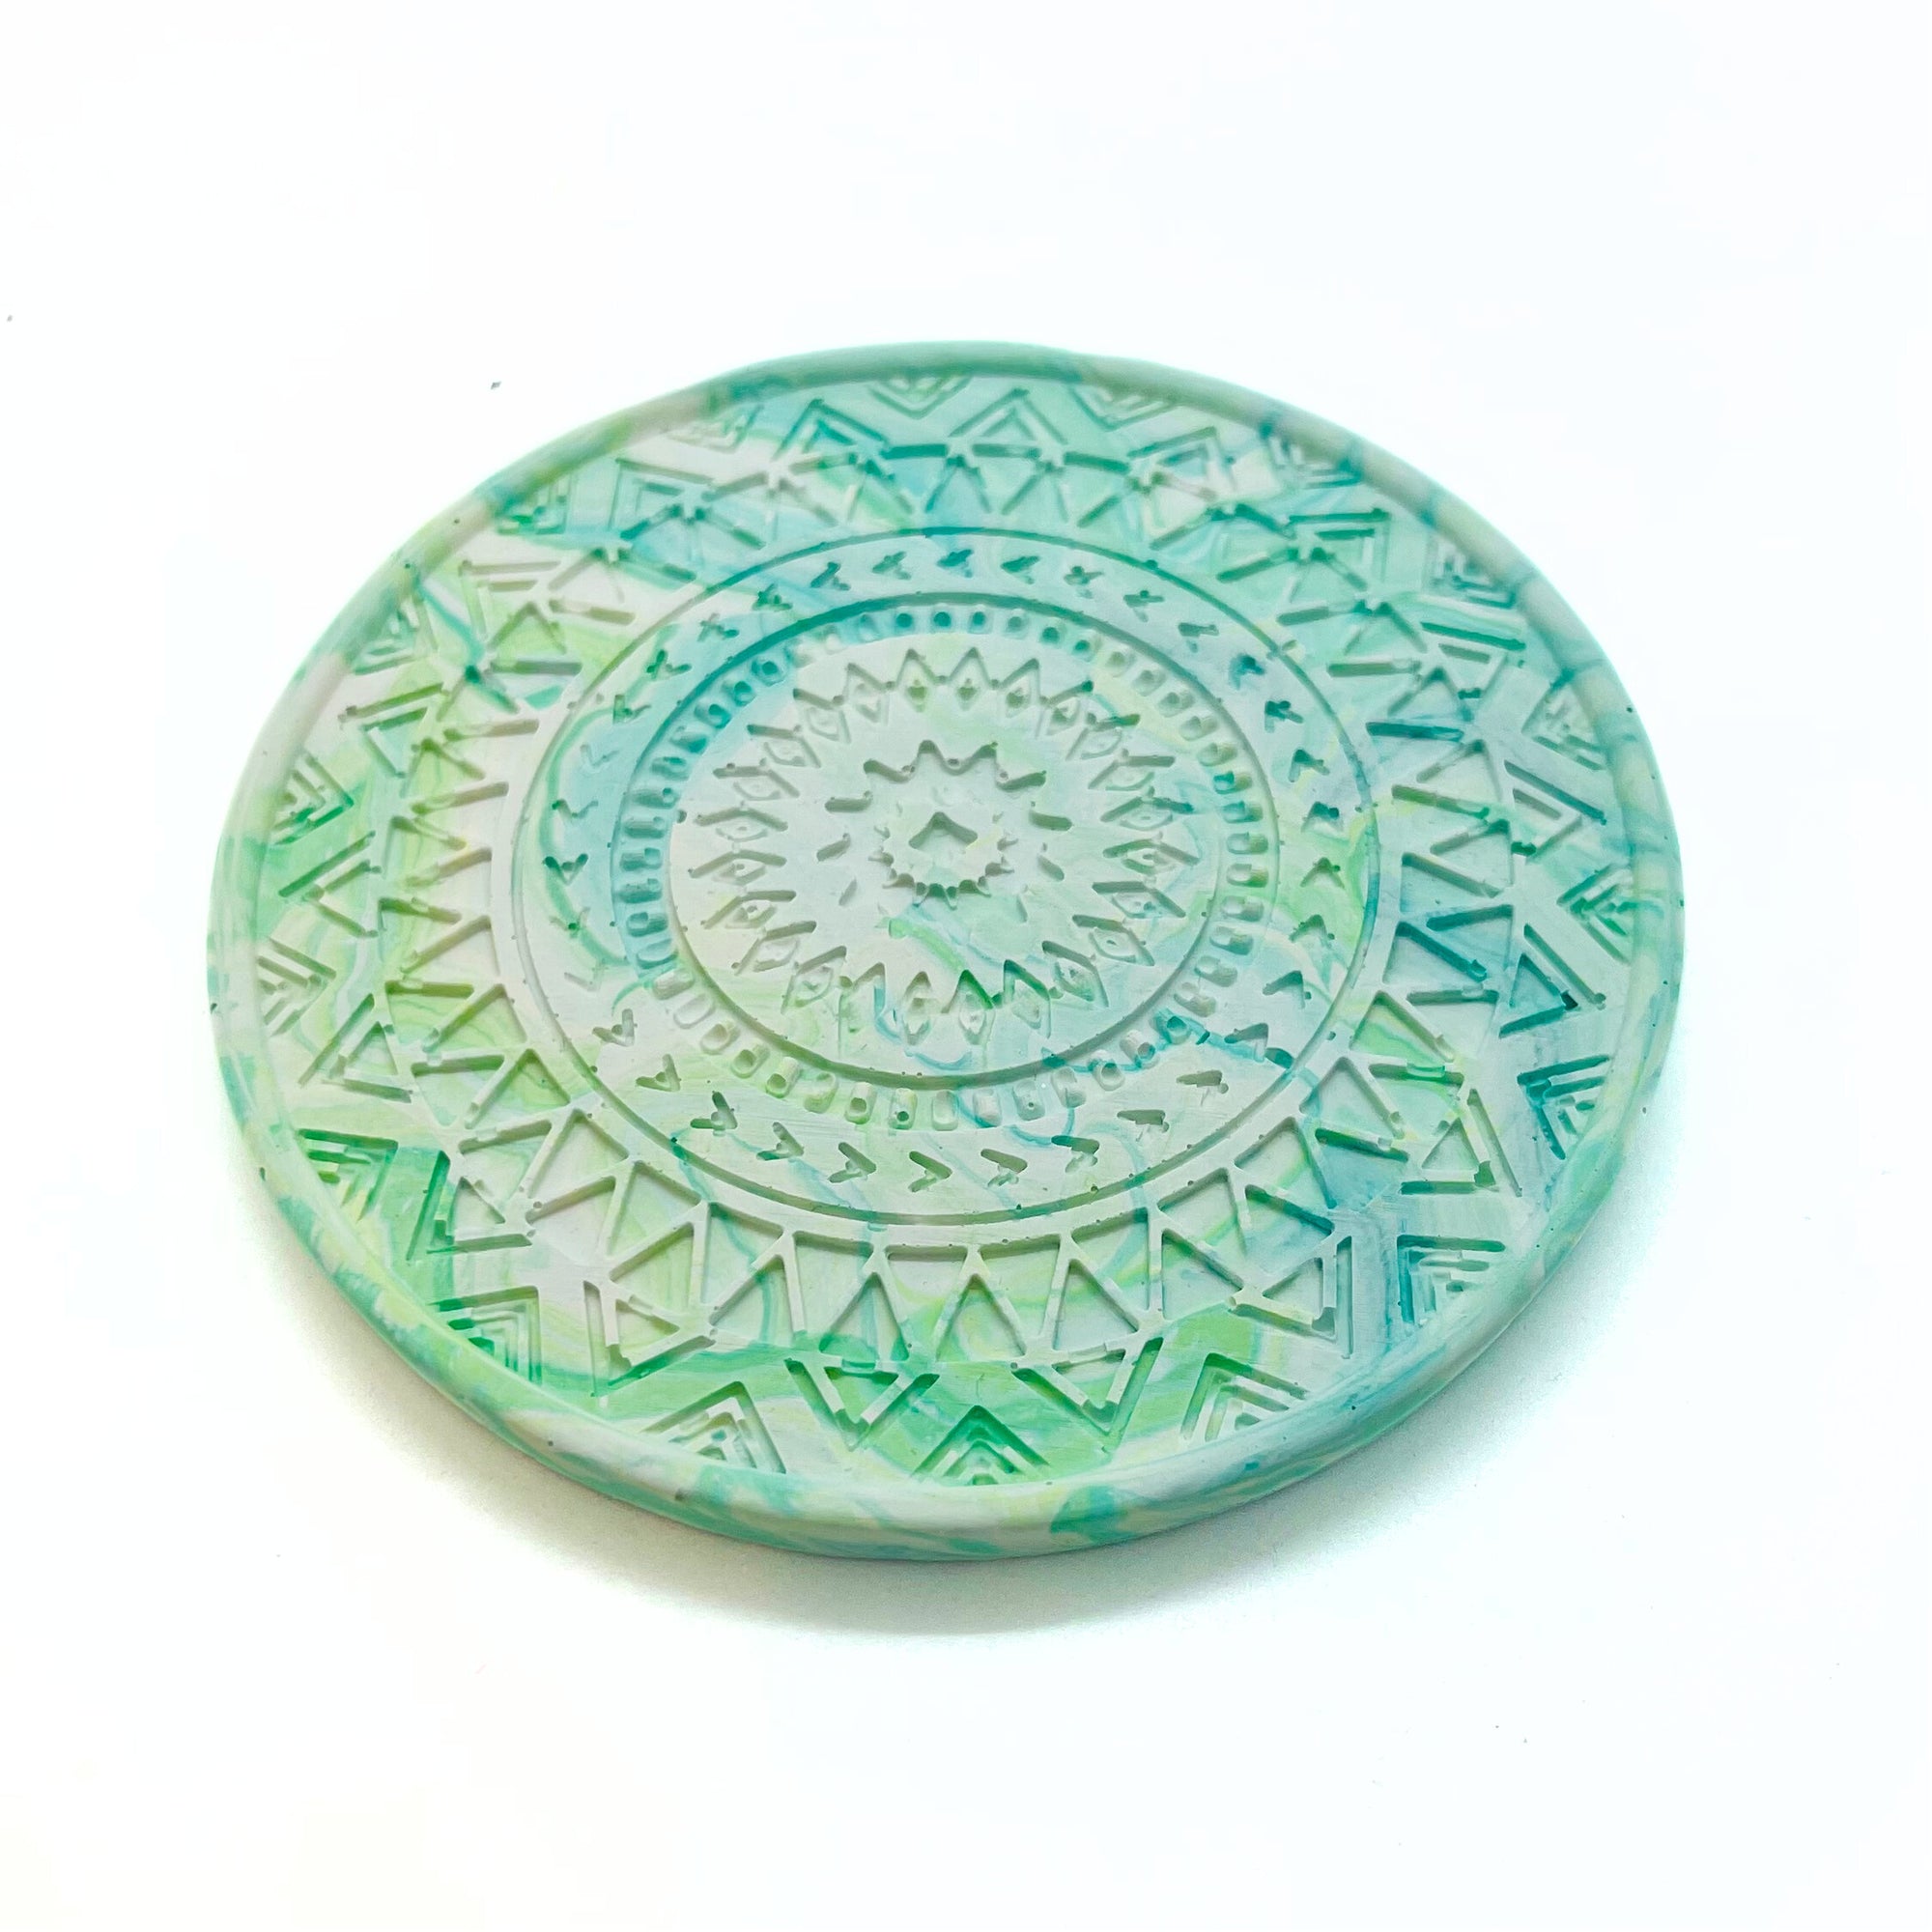 A circular mandela Jesmonite coaster measuring 9.3cm in diameter and 0.8 cm in height marbled with turquoise and lime pigment.